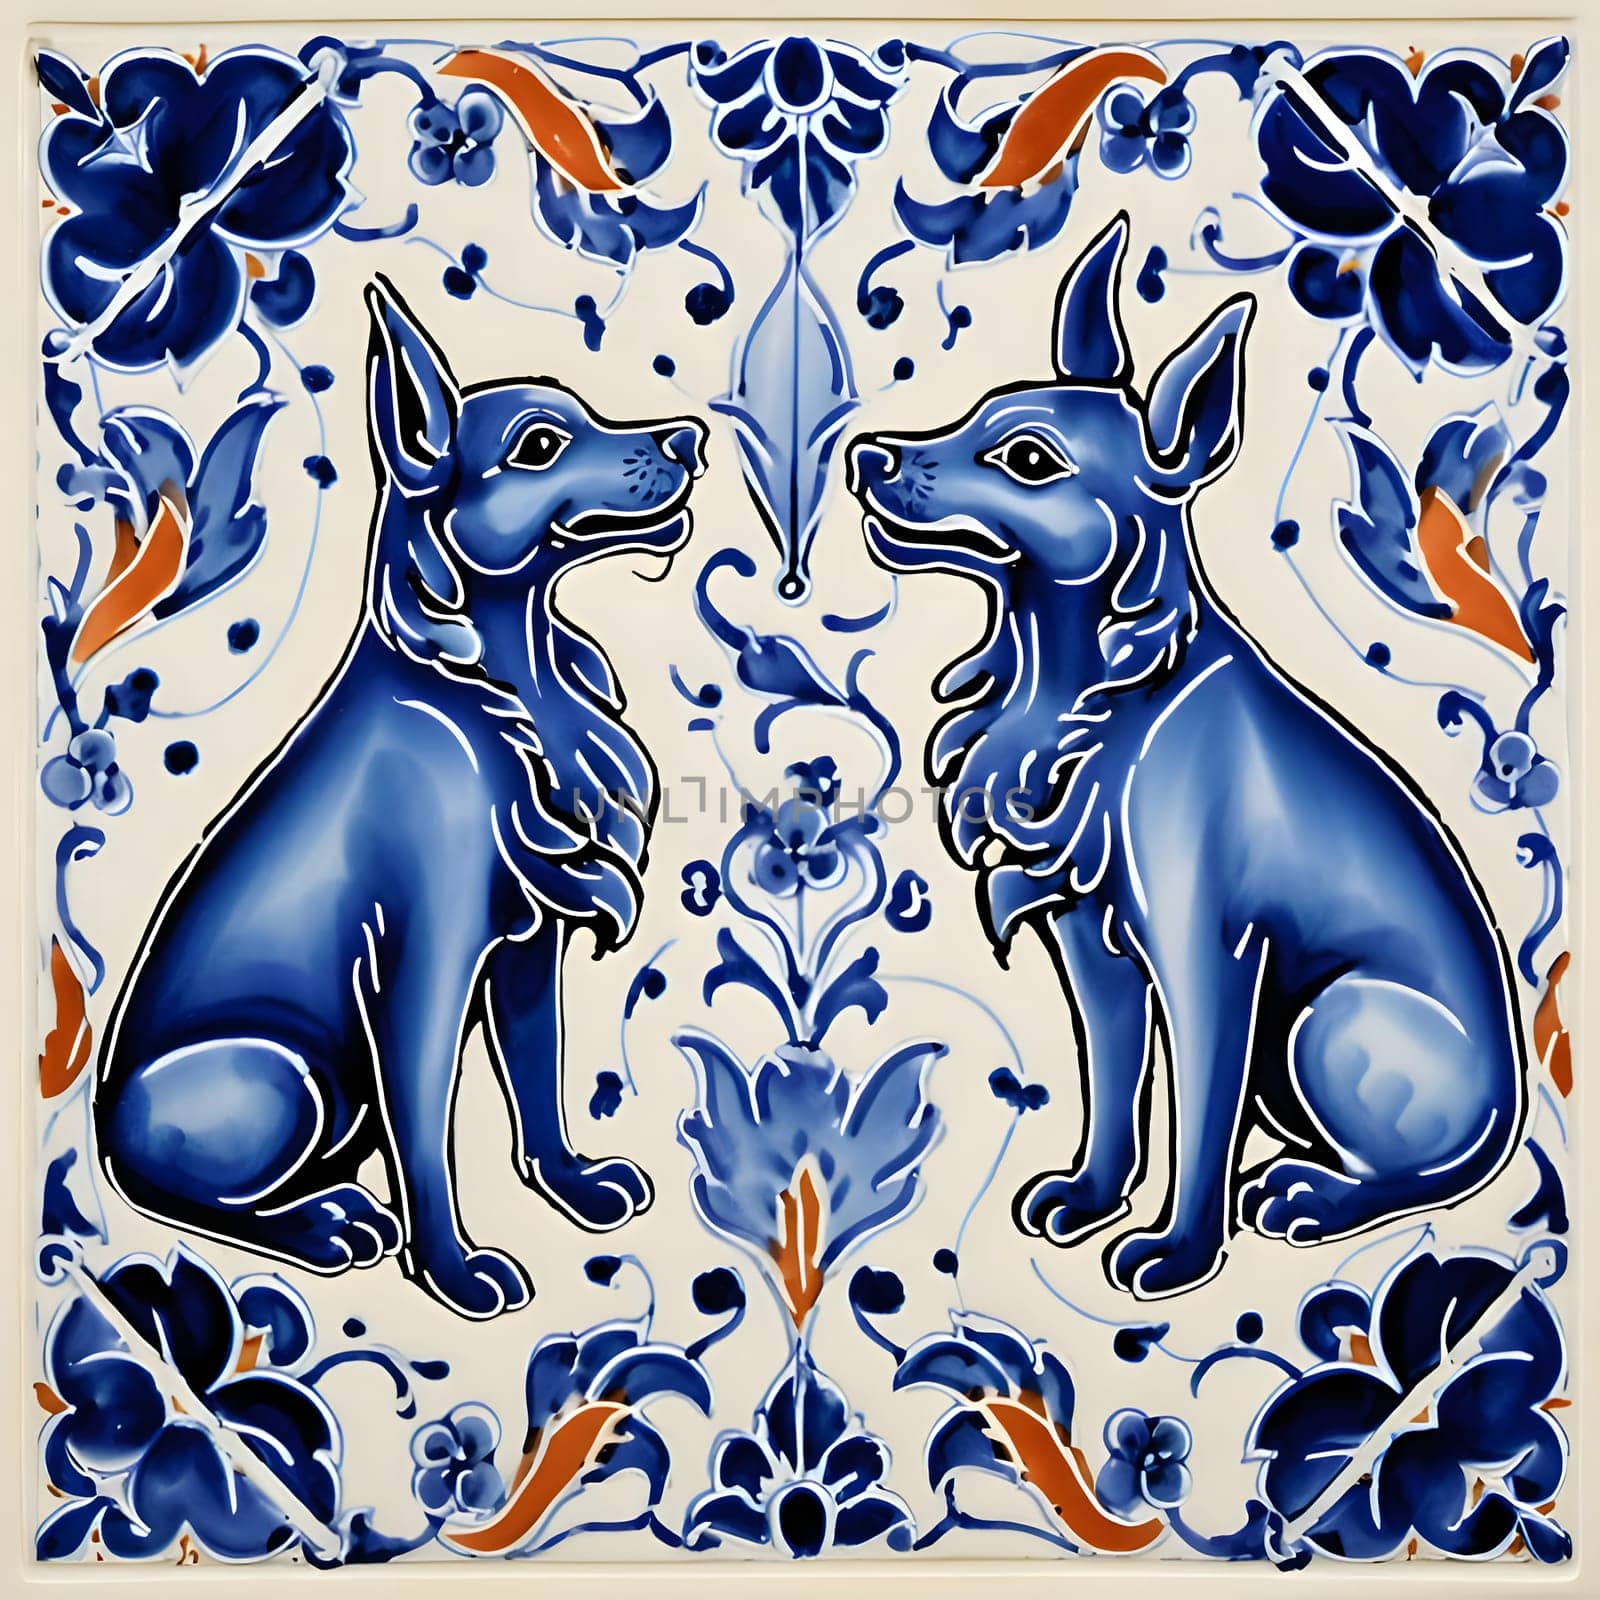 Patterns and banners backgrounds: Ceramic tile with two dogs in blue and white colors.